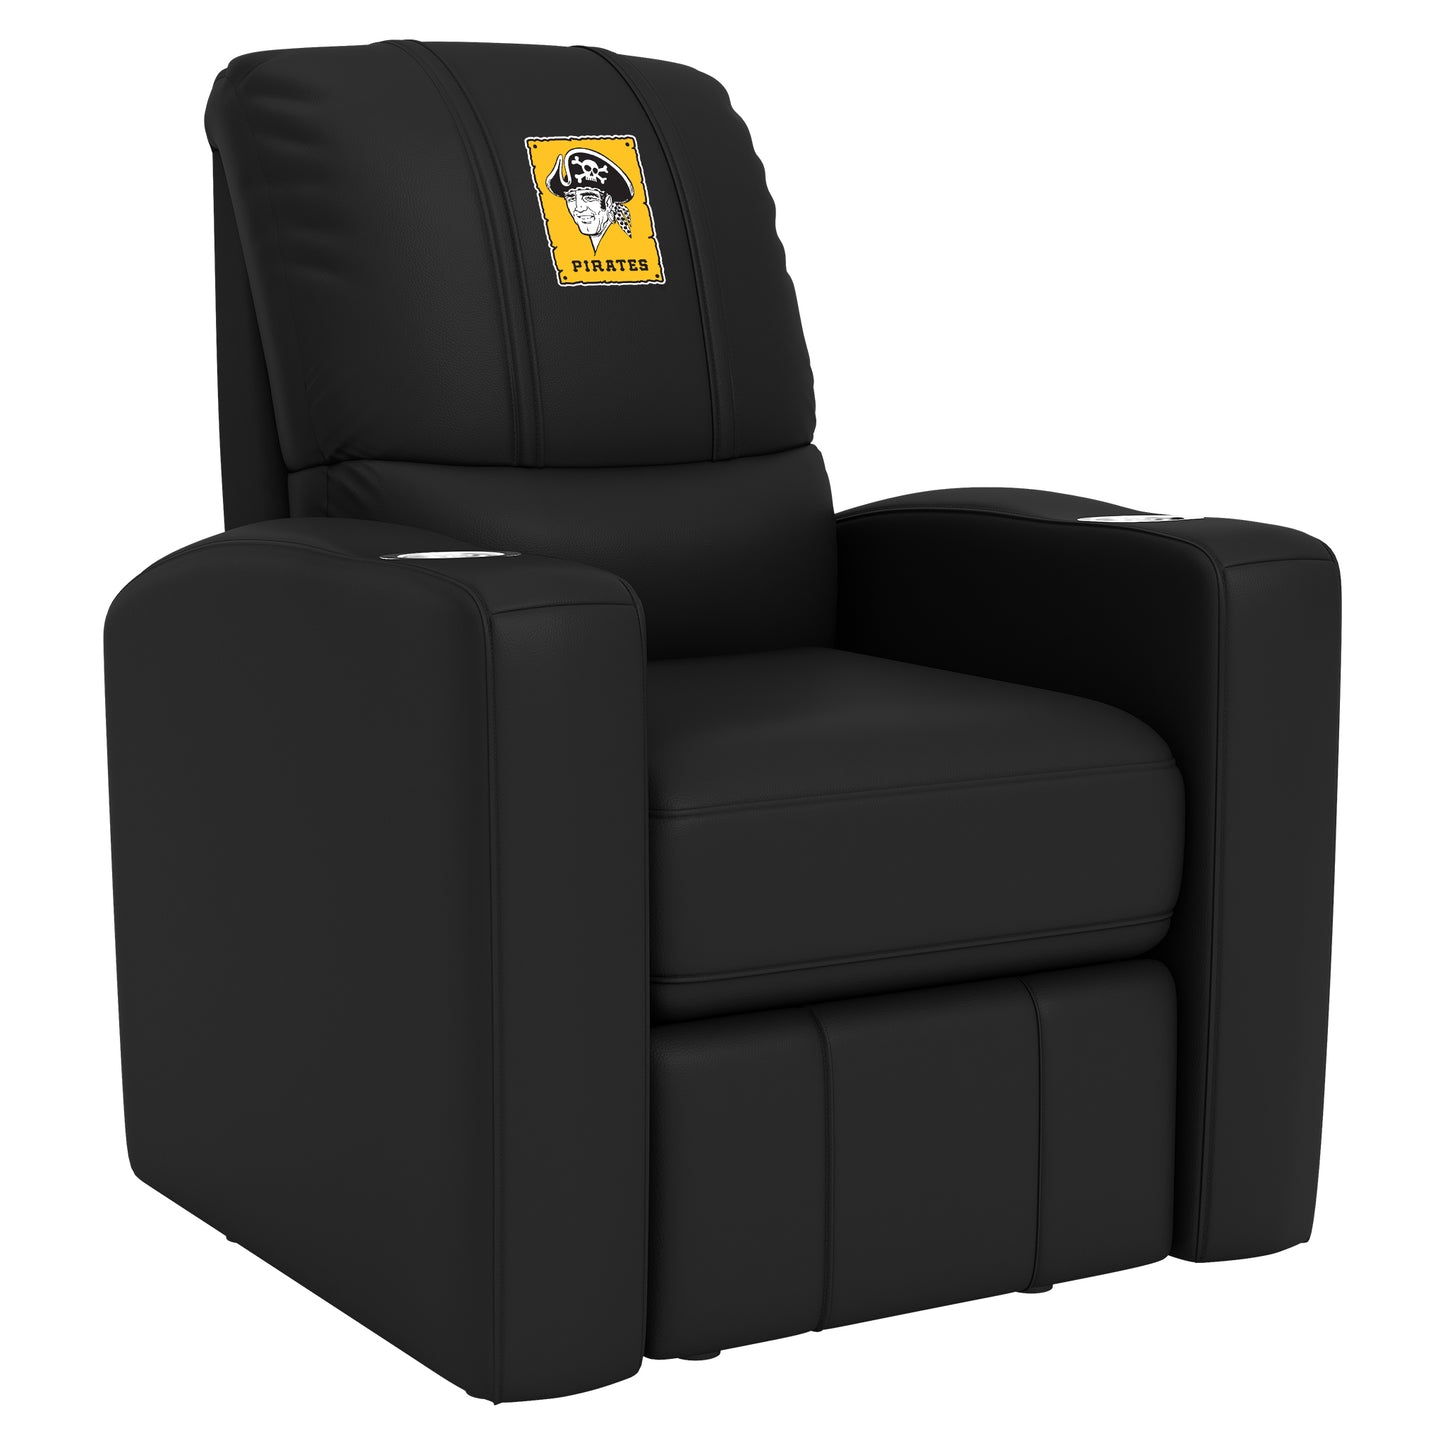 Stealth Recliner with Pittsburgh Pirates Cooperstown